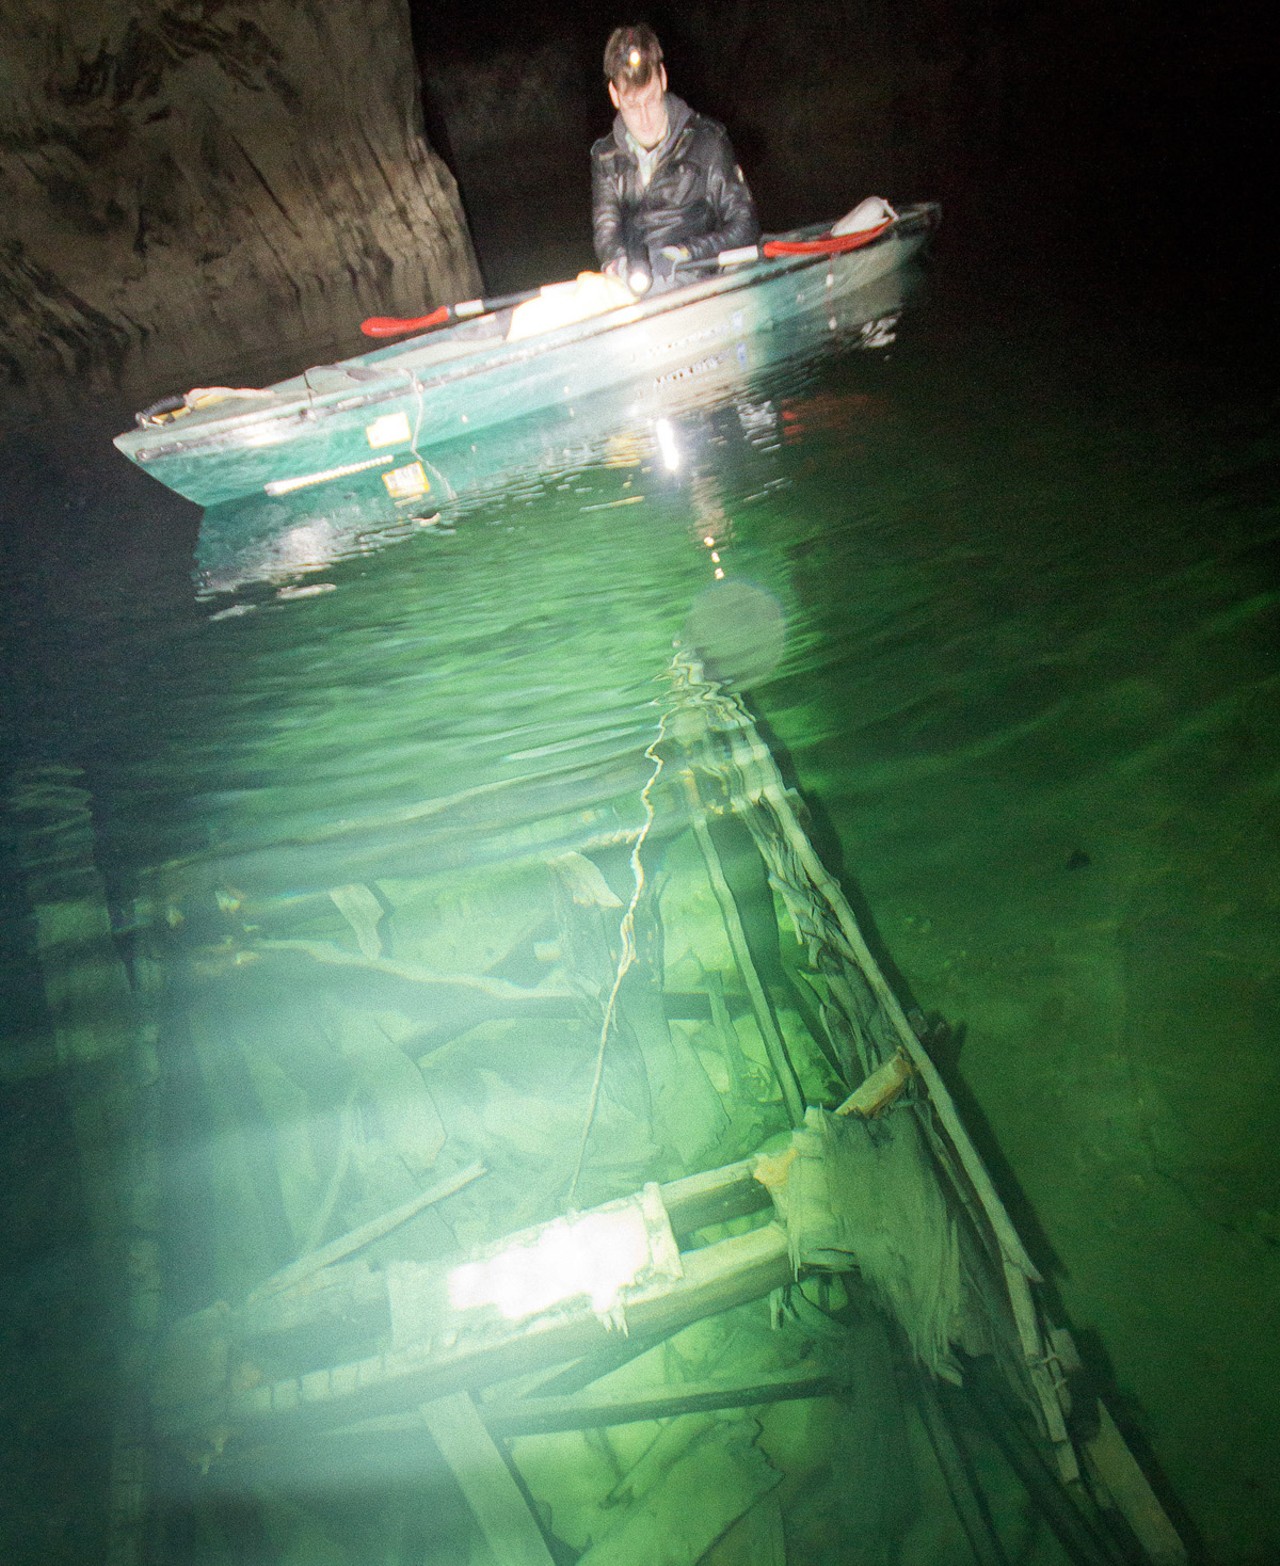 A participant in an underground kayak tour examines what was once a car wash inside the abandoned and flooded PPG silica mine.